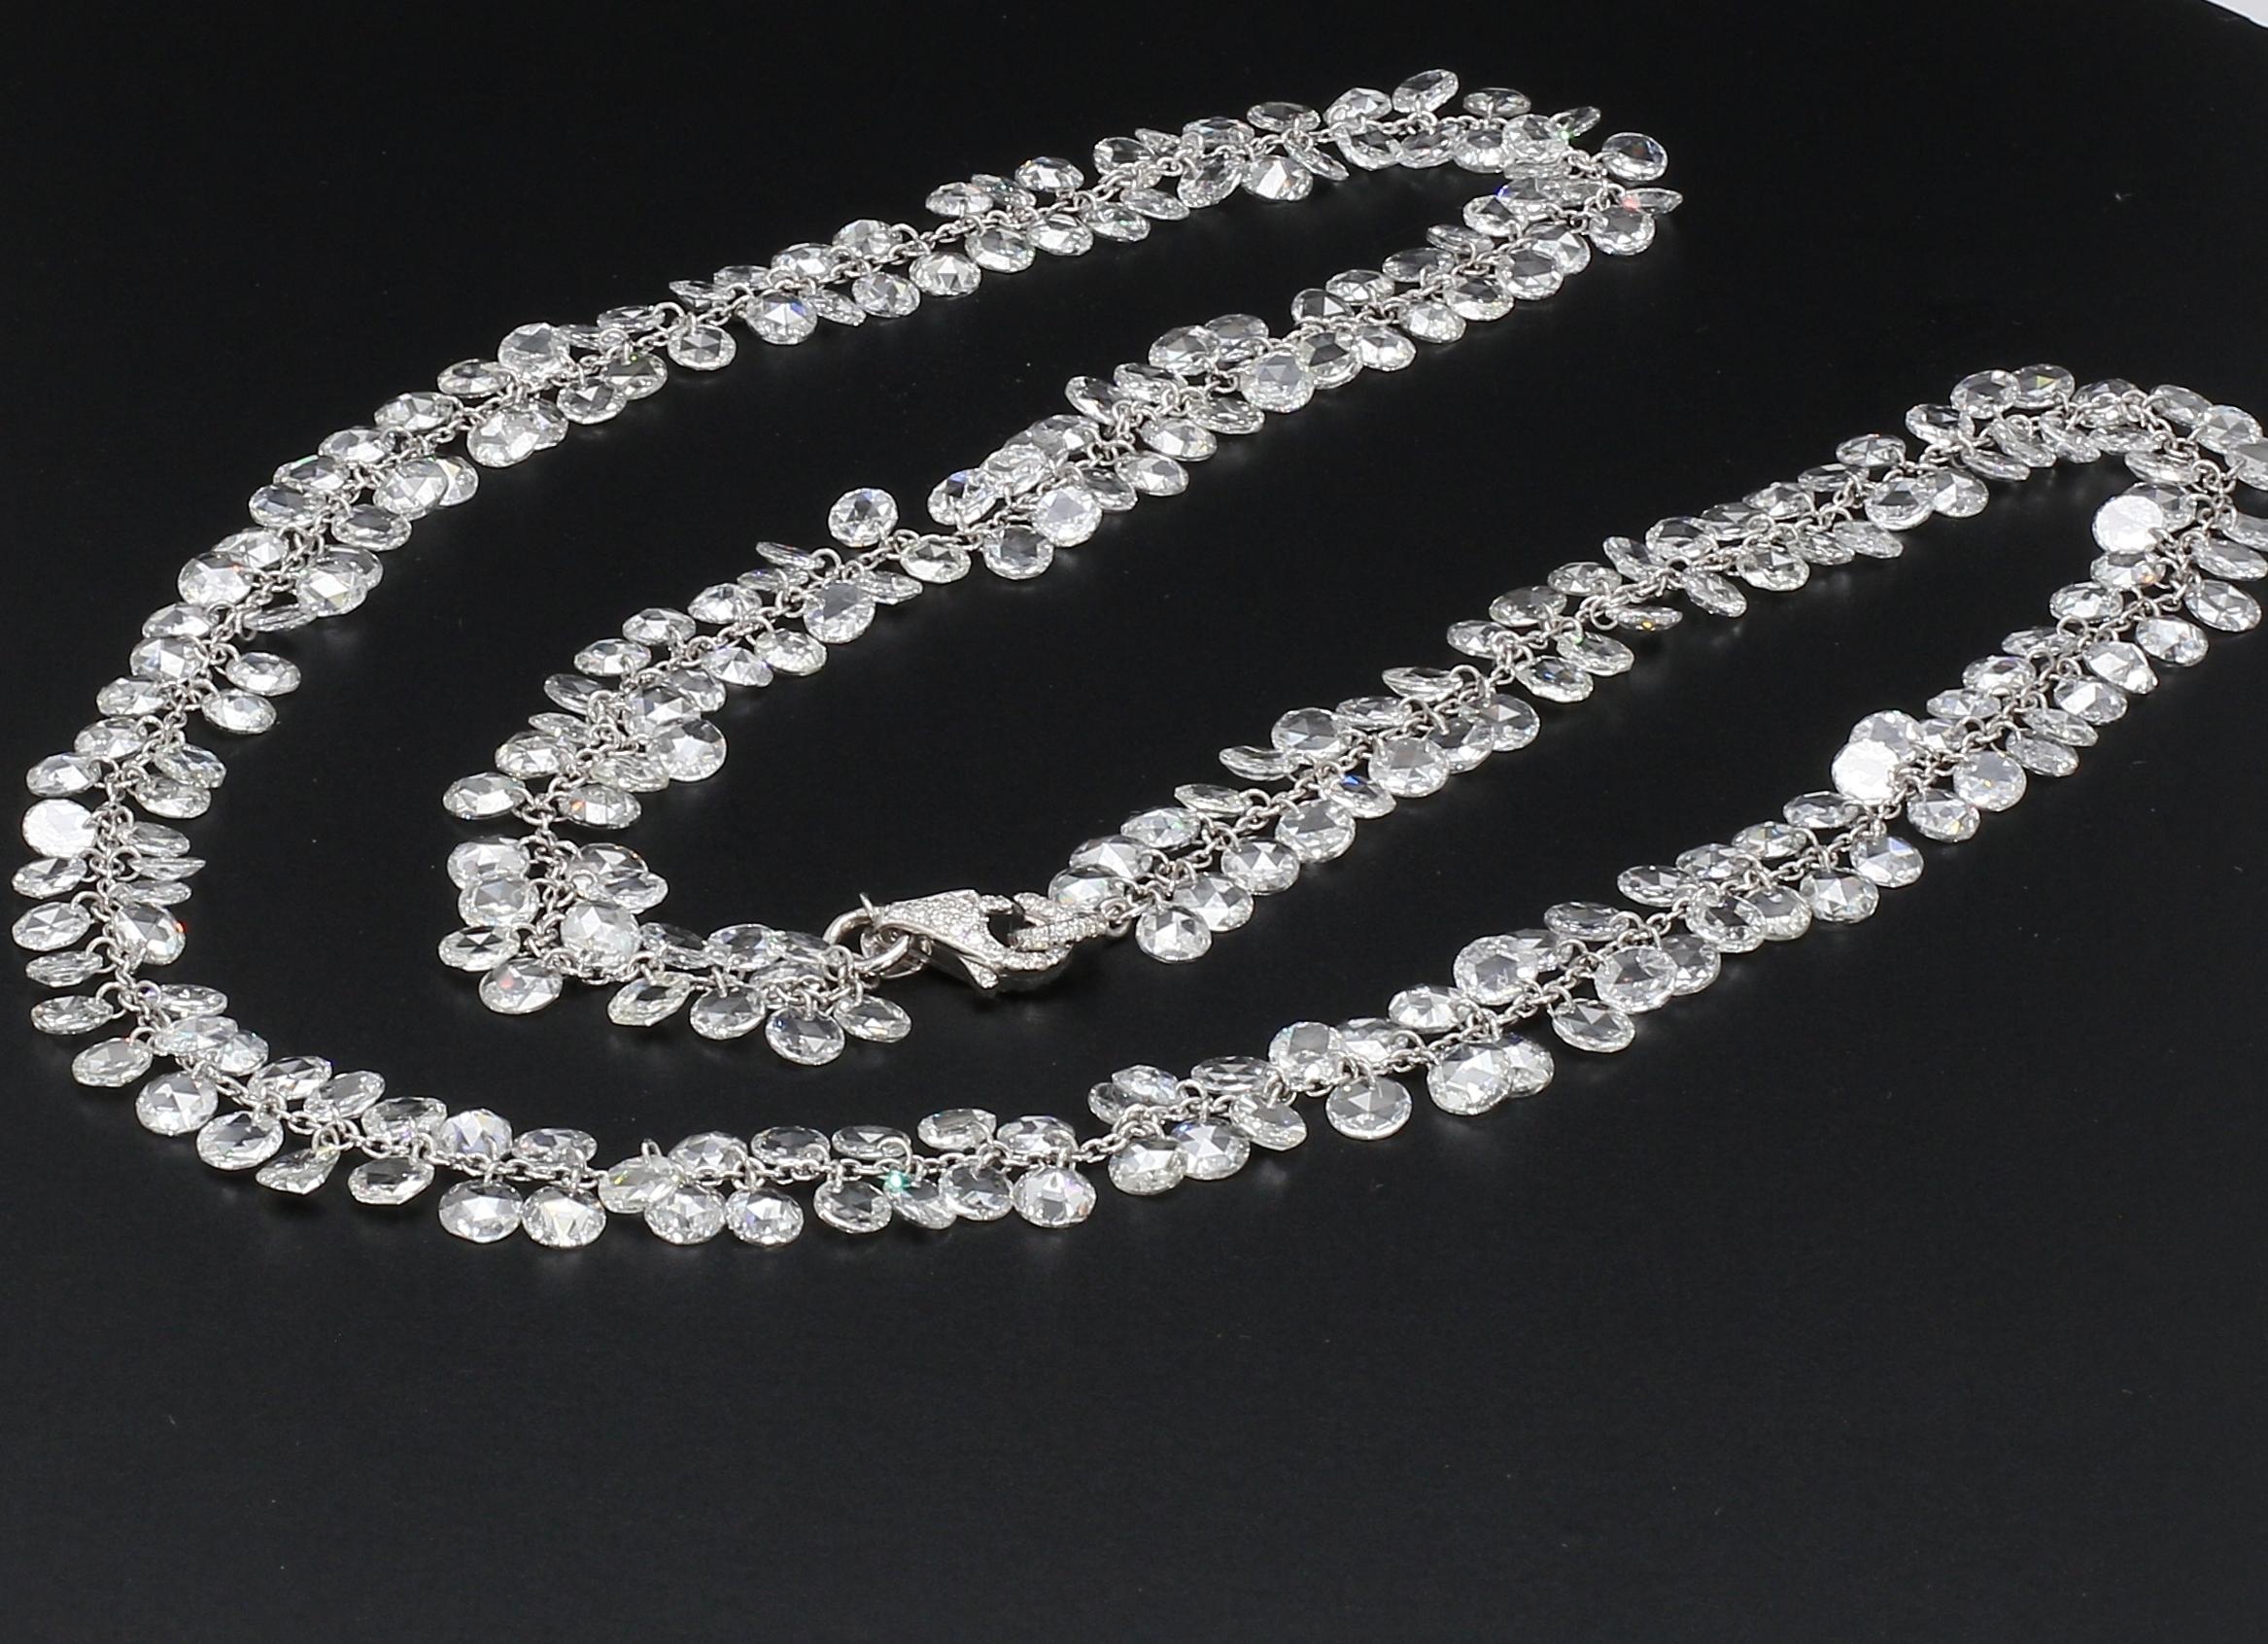 PANIM Rosecut Diamond 16inch Long flower Necklace in 18Karat White Gold

In this necklace rosecut diamonds are evenly spaced on a white gold chain. This is a piece that can be worn everyday, alone or layered with other necklaces.

18K White